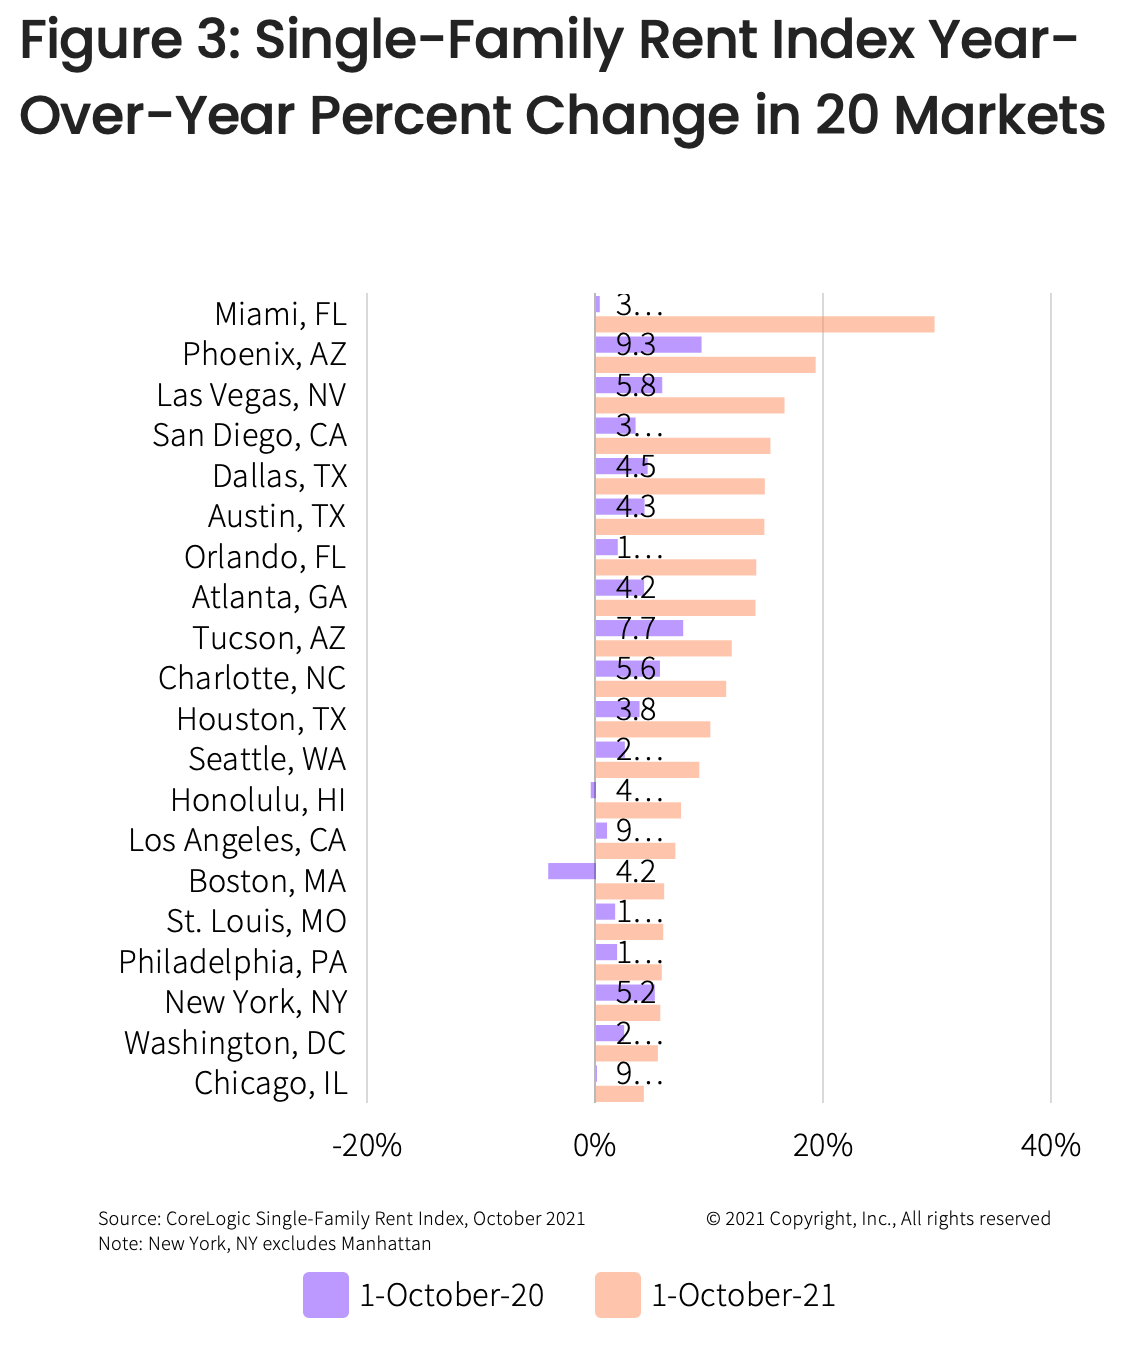 A single-family rent index showing the year-over-year rent percent change in 20 markets